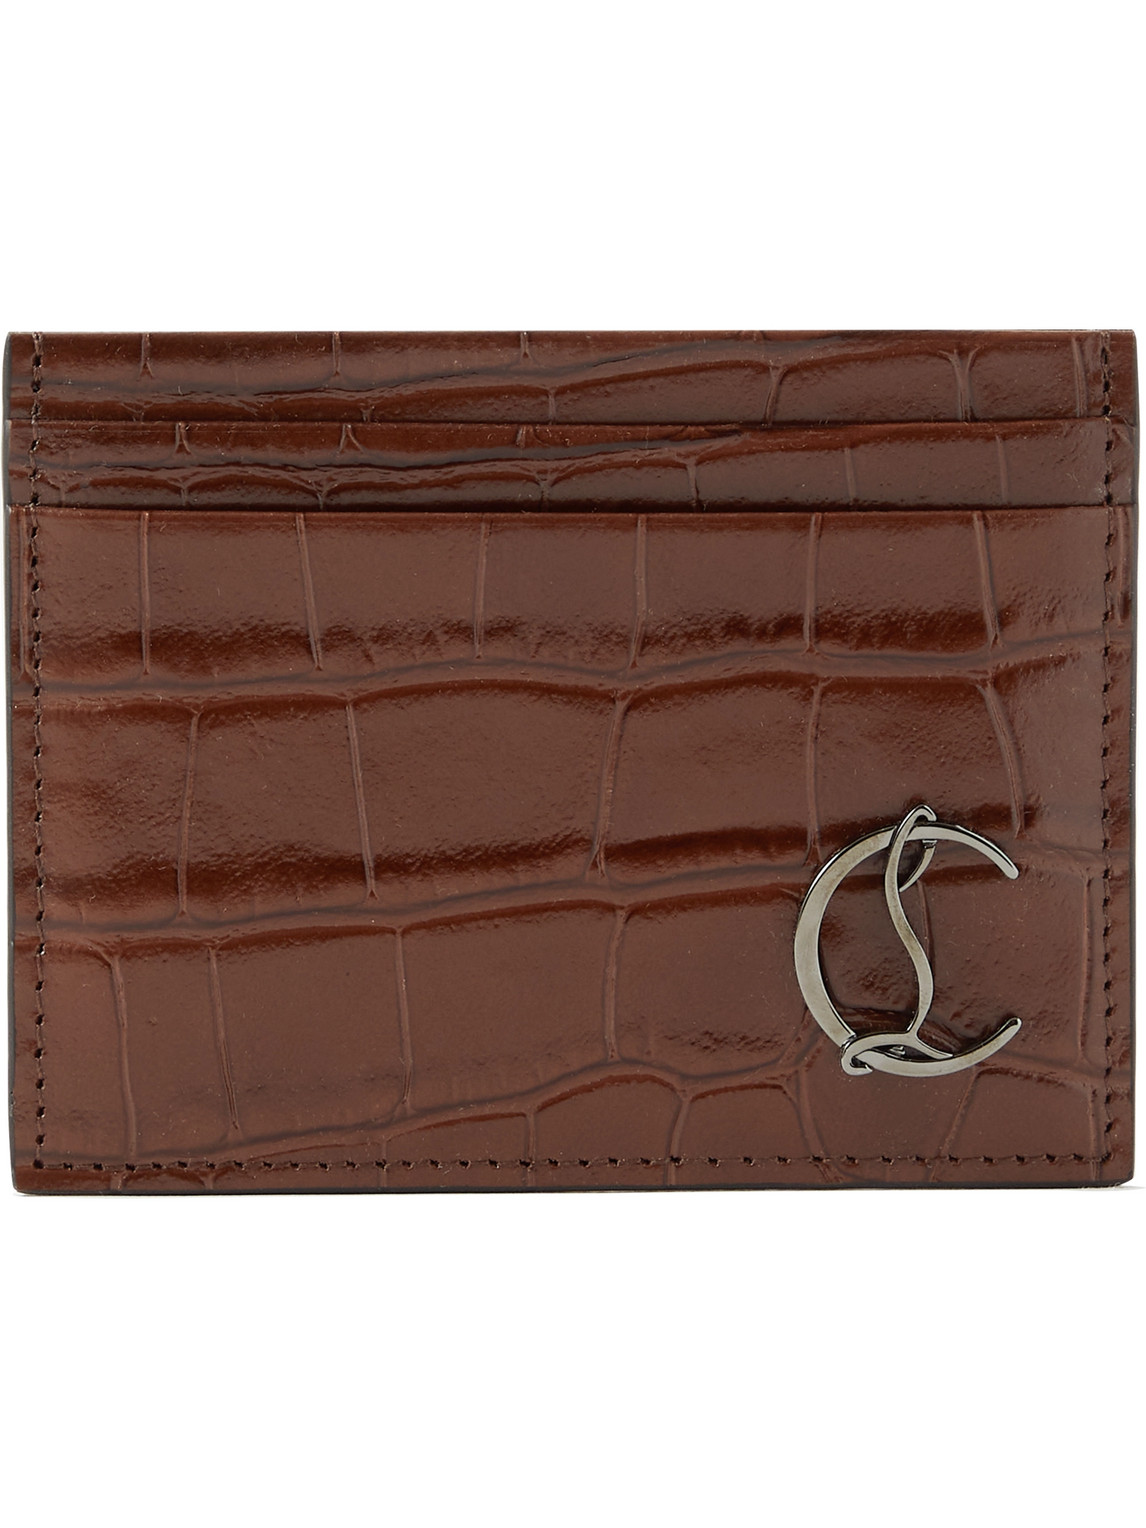 Christian Louboutin Croc-effect Leather Cardholder In Brown